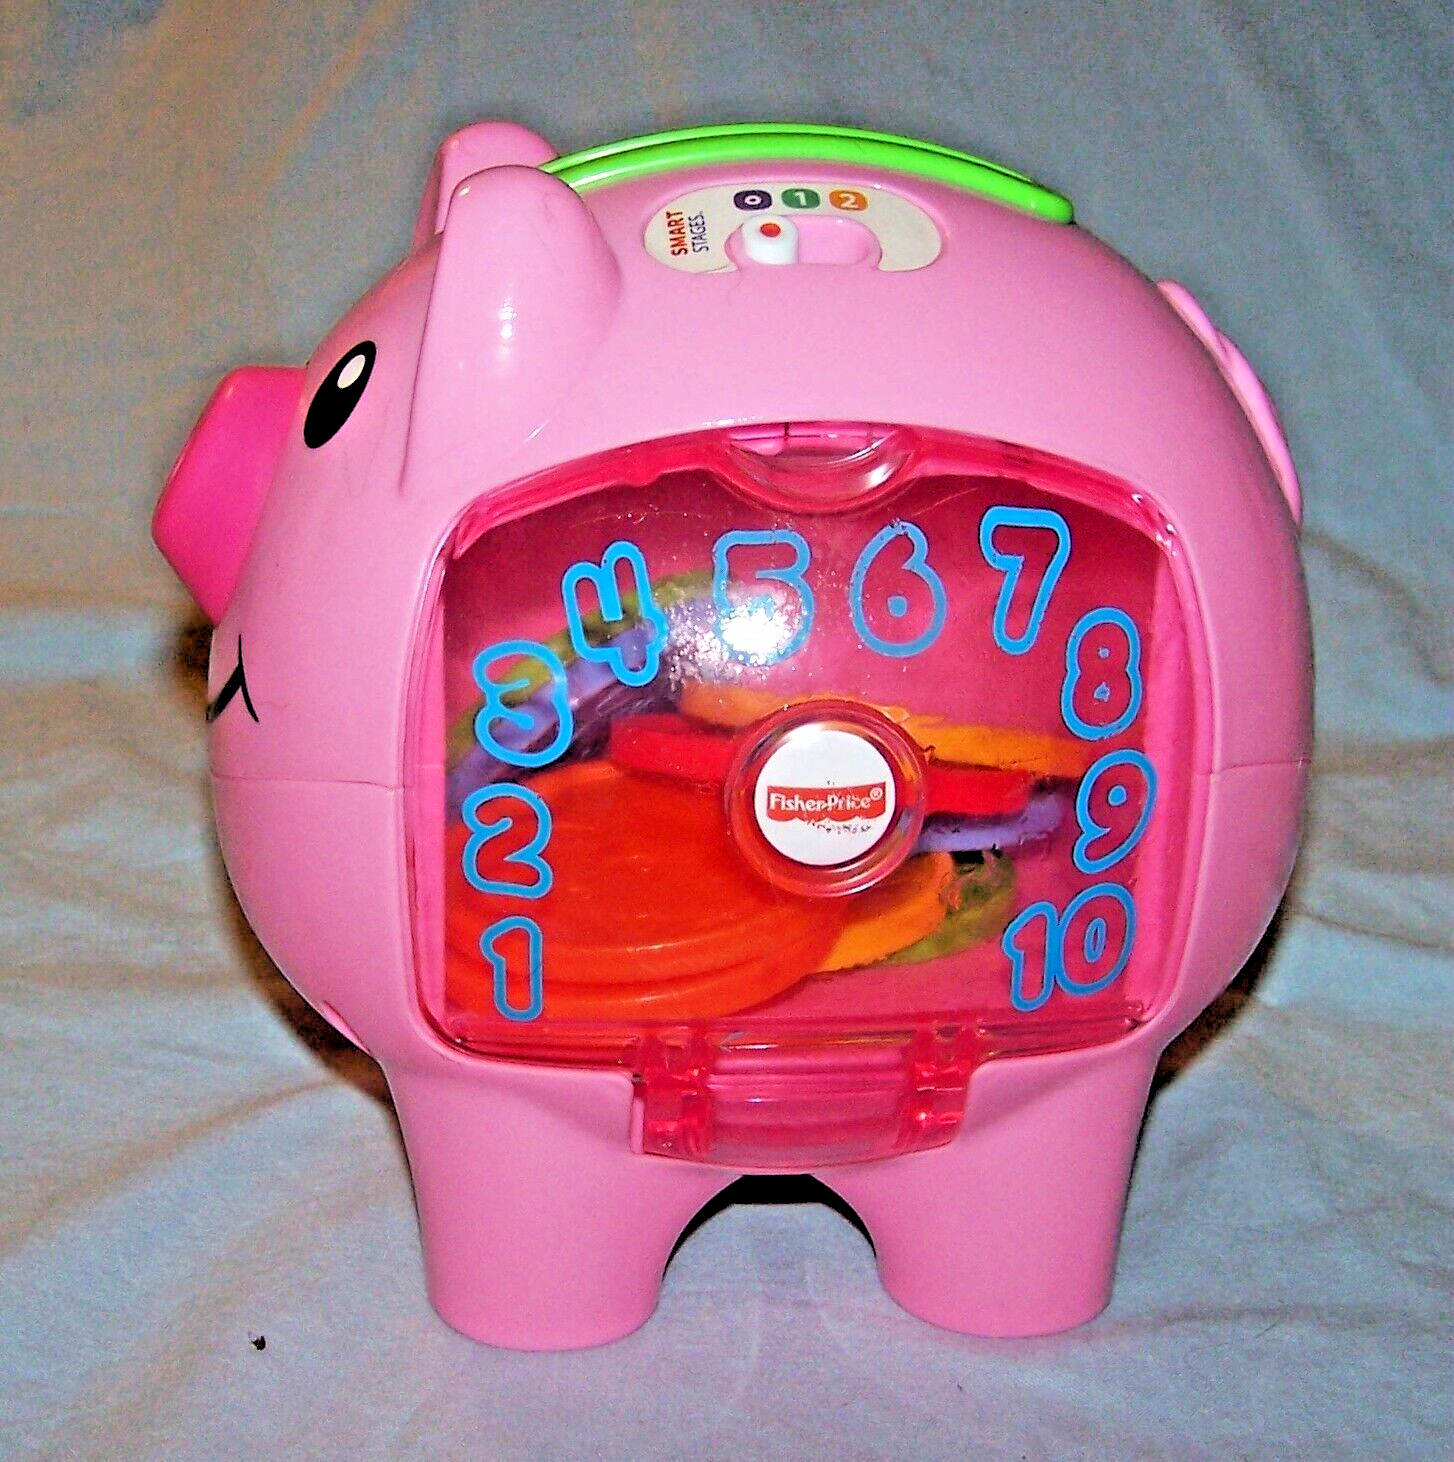 2006 Talking Fisher Price Smart Stages Piggy Bank w/Plastic Coins - $15.35